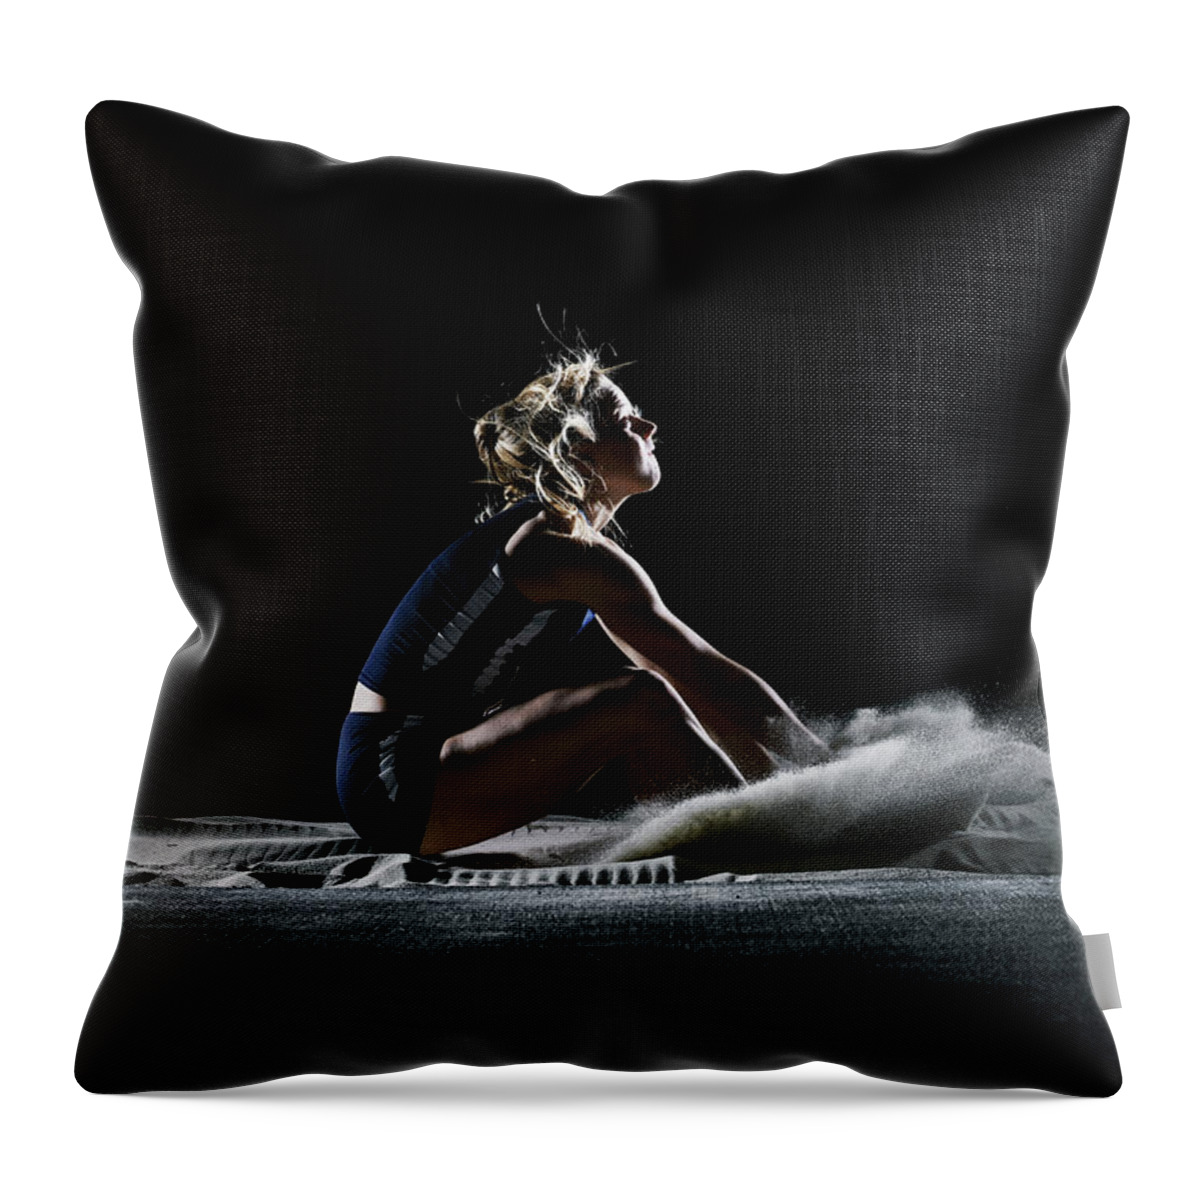 Three Quarter Length Throw Pillow featuring the photograph Female Athlete Landing In Long Jump by Thomas Barwick